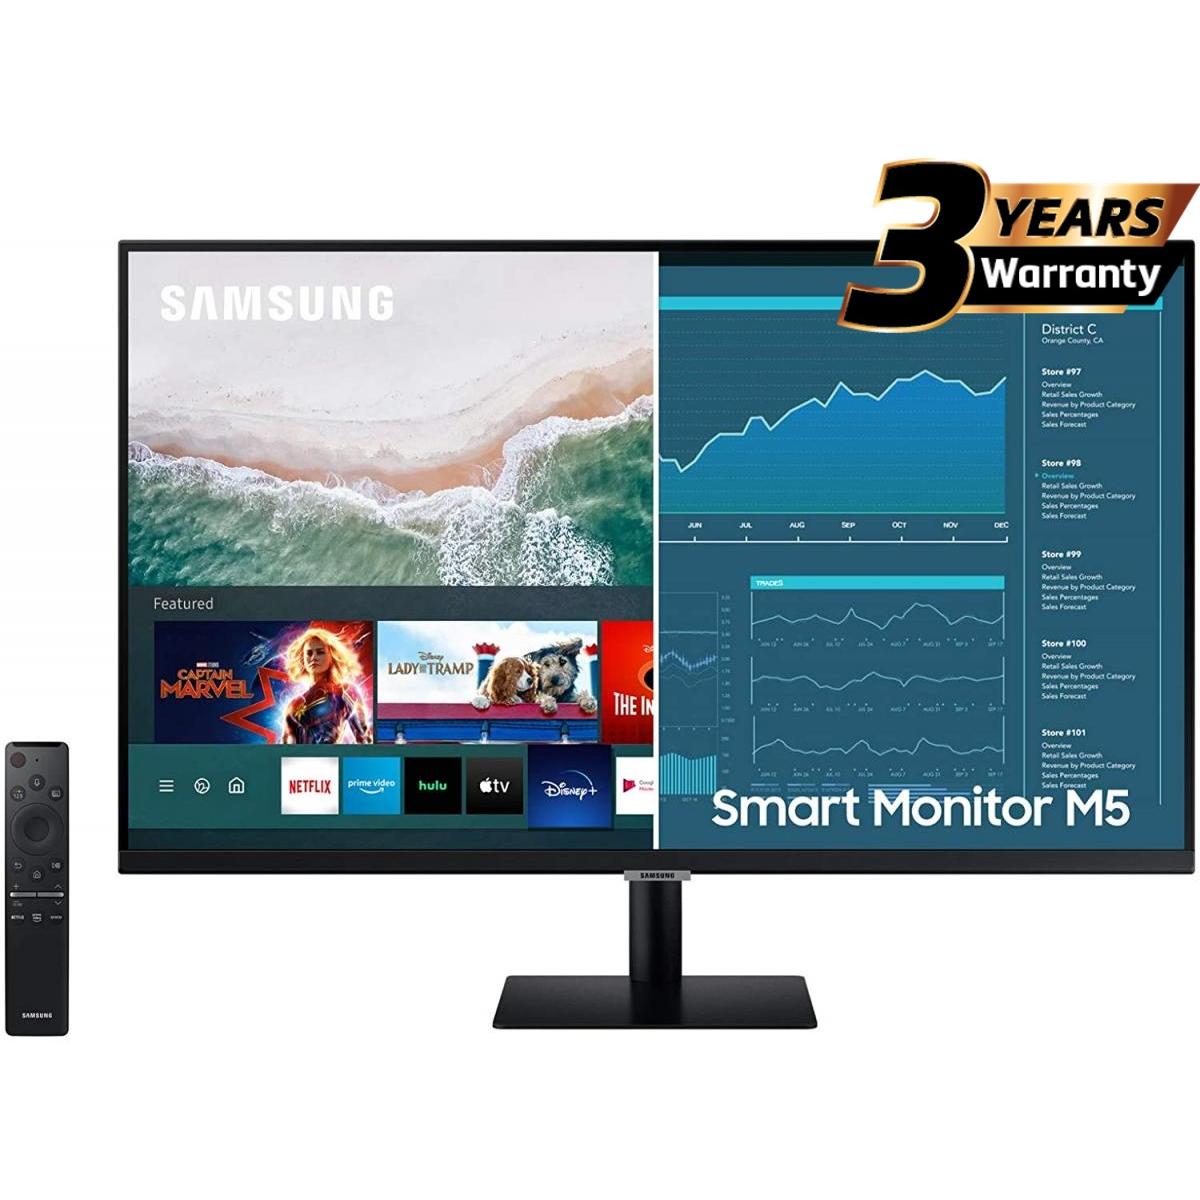 Samsung 27" M50A FHD Smart Monitor with Streaming TV in Black